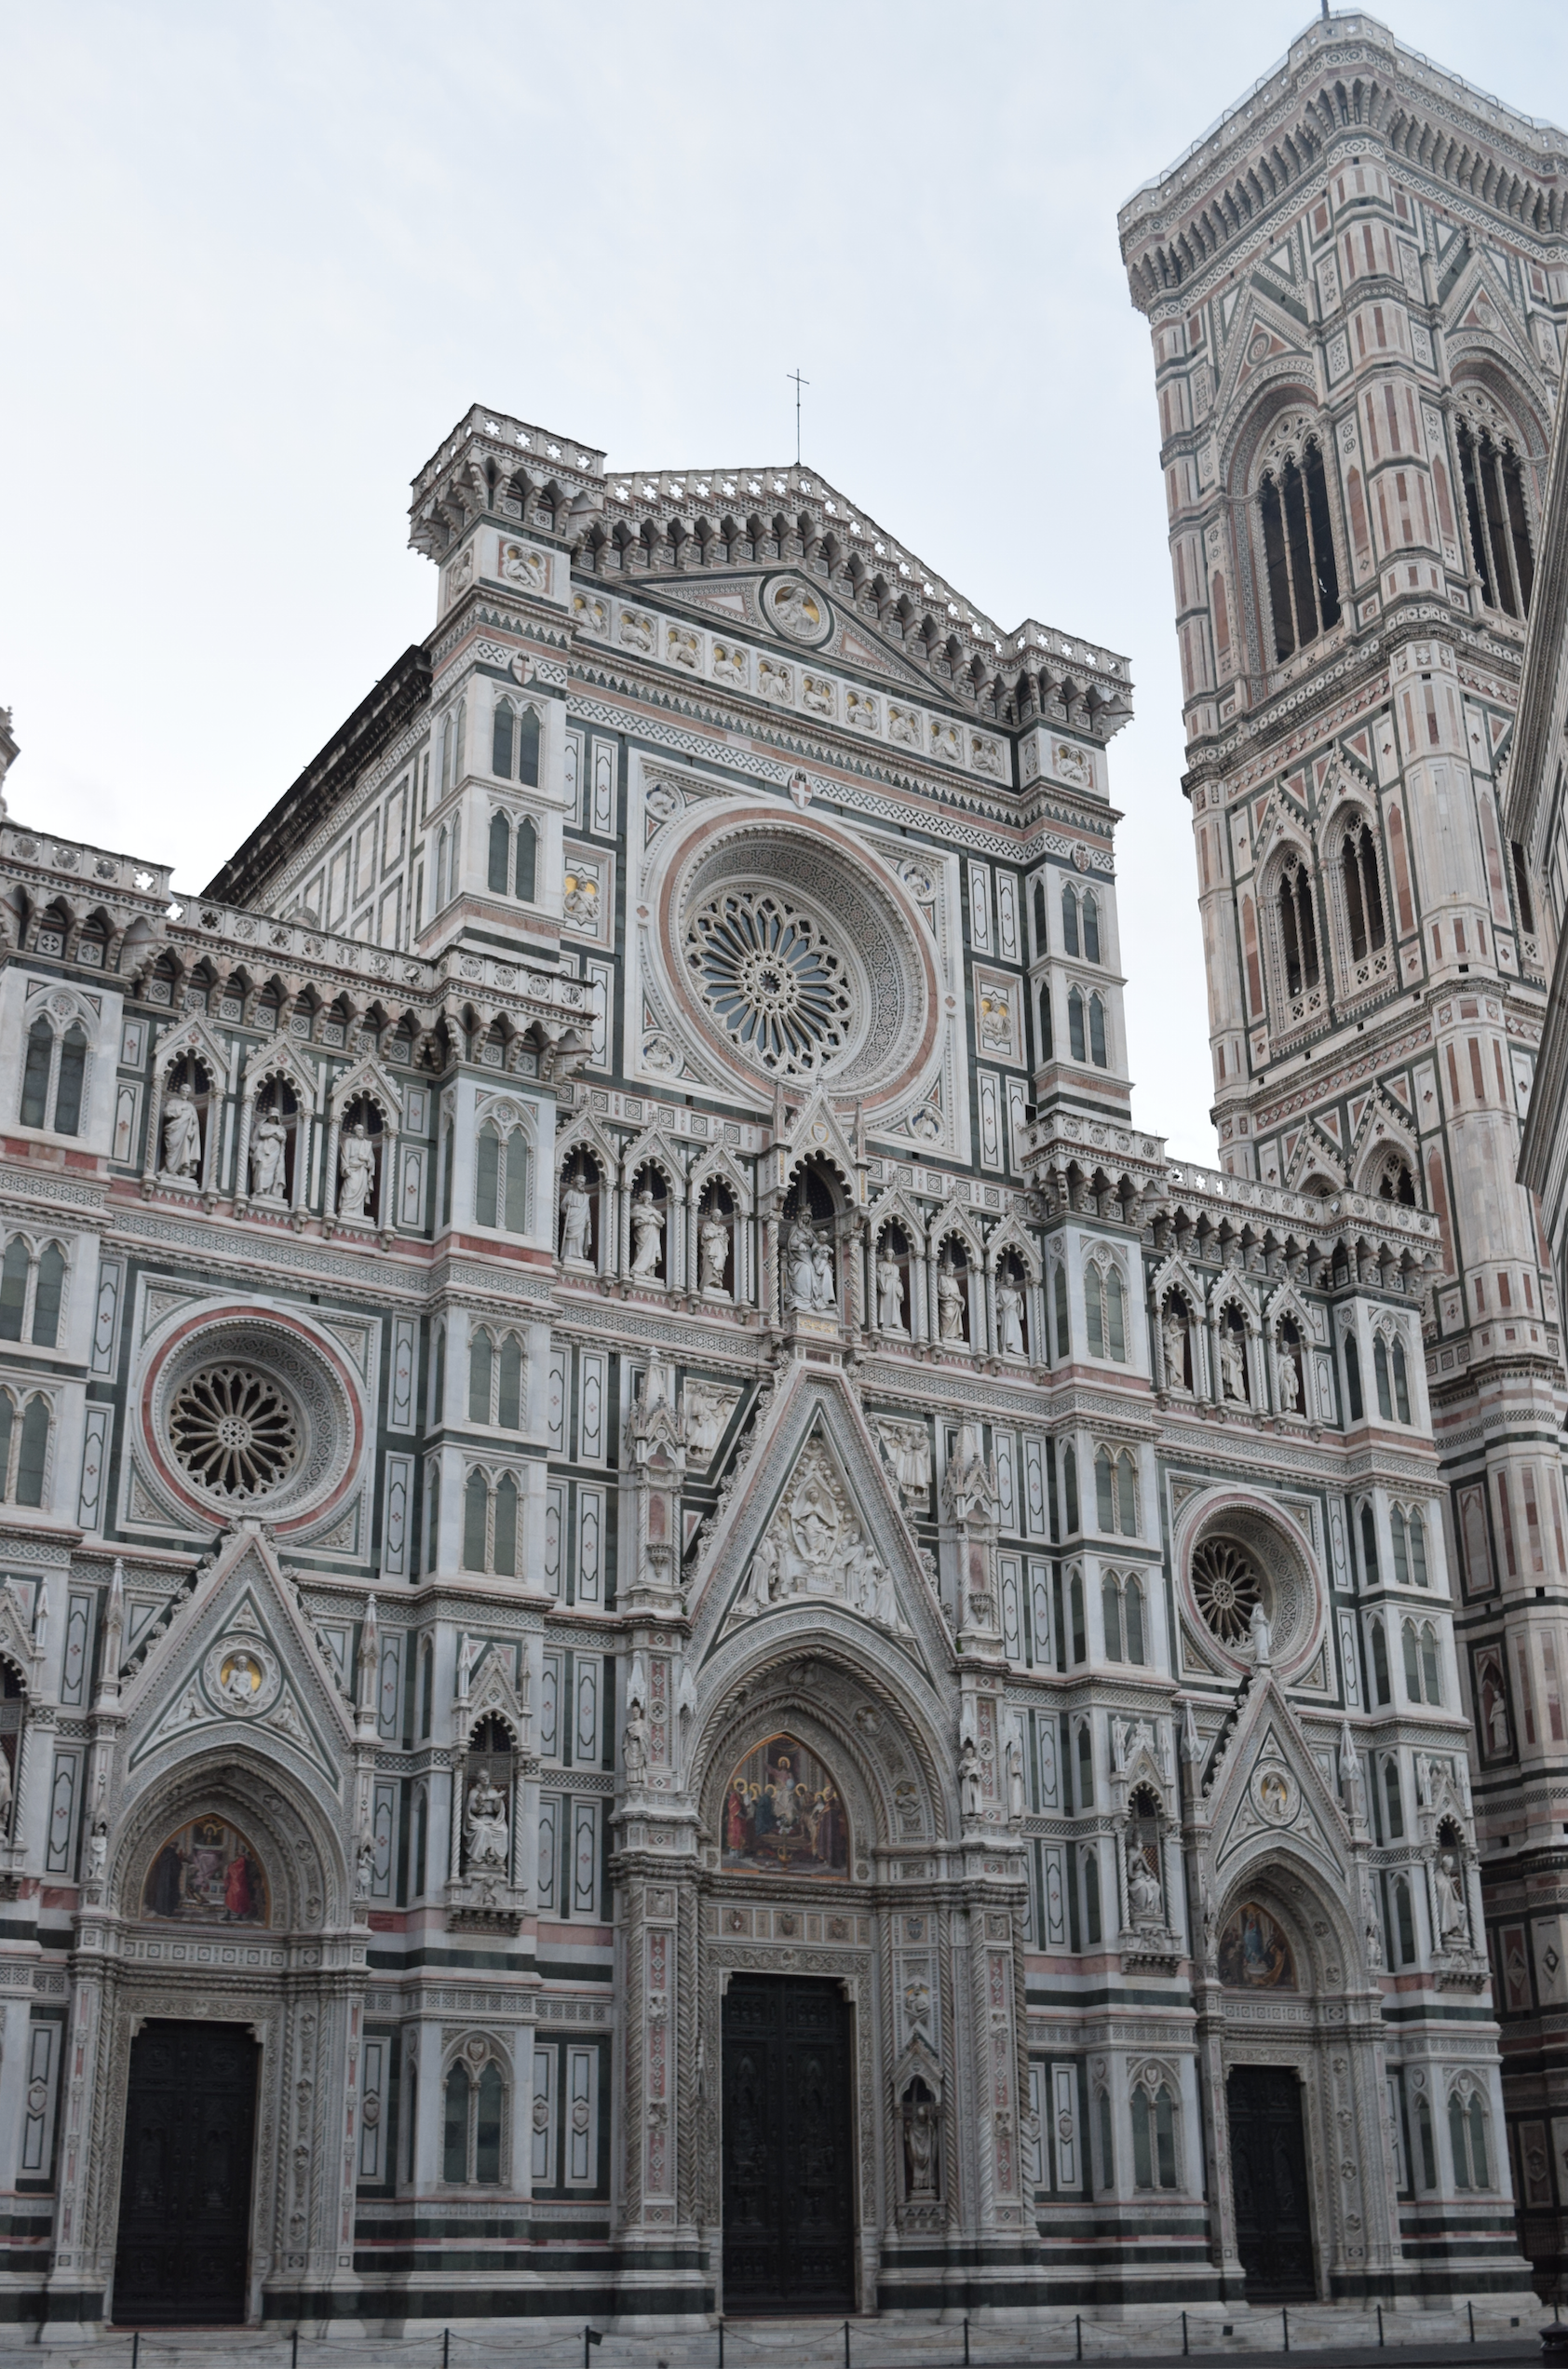 3 Days In Florence - Florence Italy - Planning a trip to Italy - Italy Itinerary - Florence - Tuscany - What to do in Florence - What to do in Italy - Where to go in Florence - Climbing the Duomo - Seeing The David - Best Tips for Florence Italy Travel - Communikait by Kait Hanson